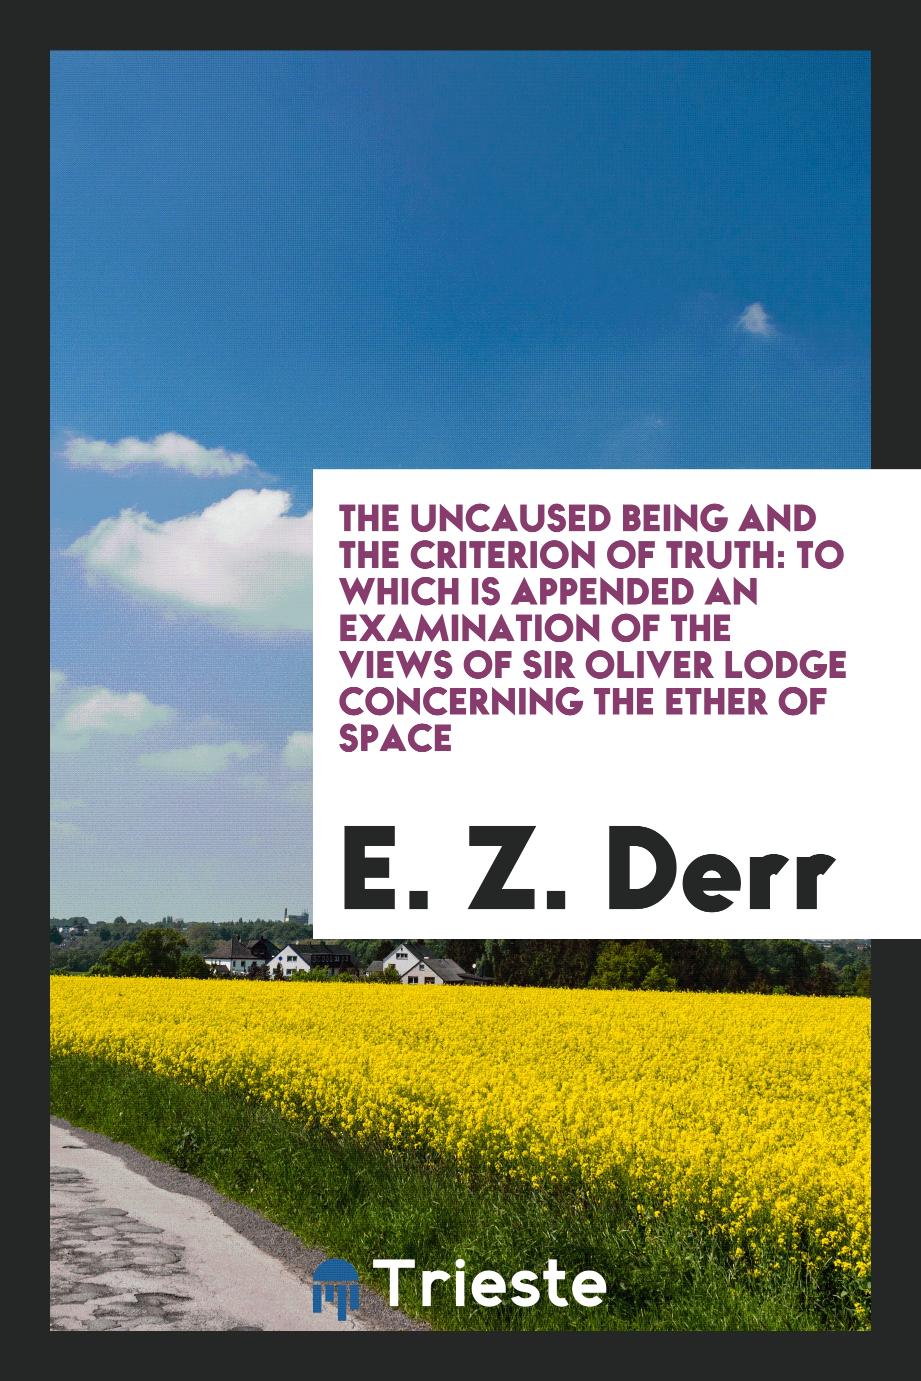 The Uncaused Being and the Criterion of Truth: To Which Is Appended an Examination of the Views of Sir Oliver Lodge Concerning the Ether of Space